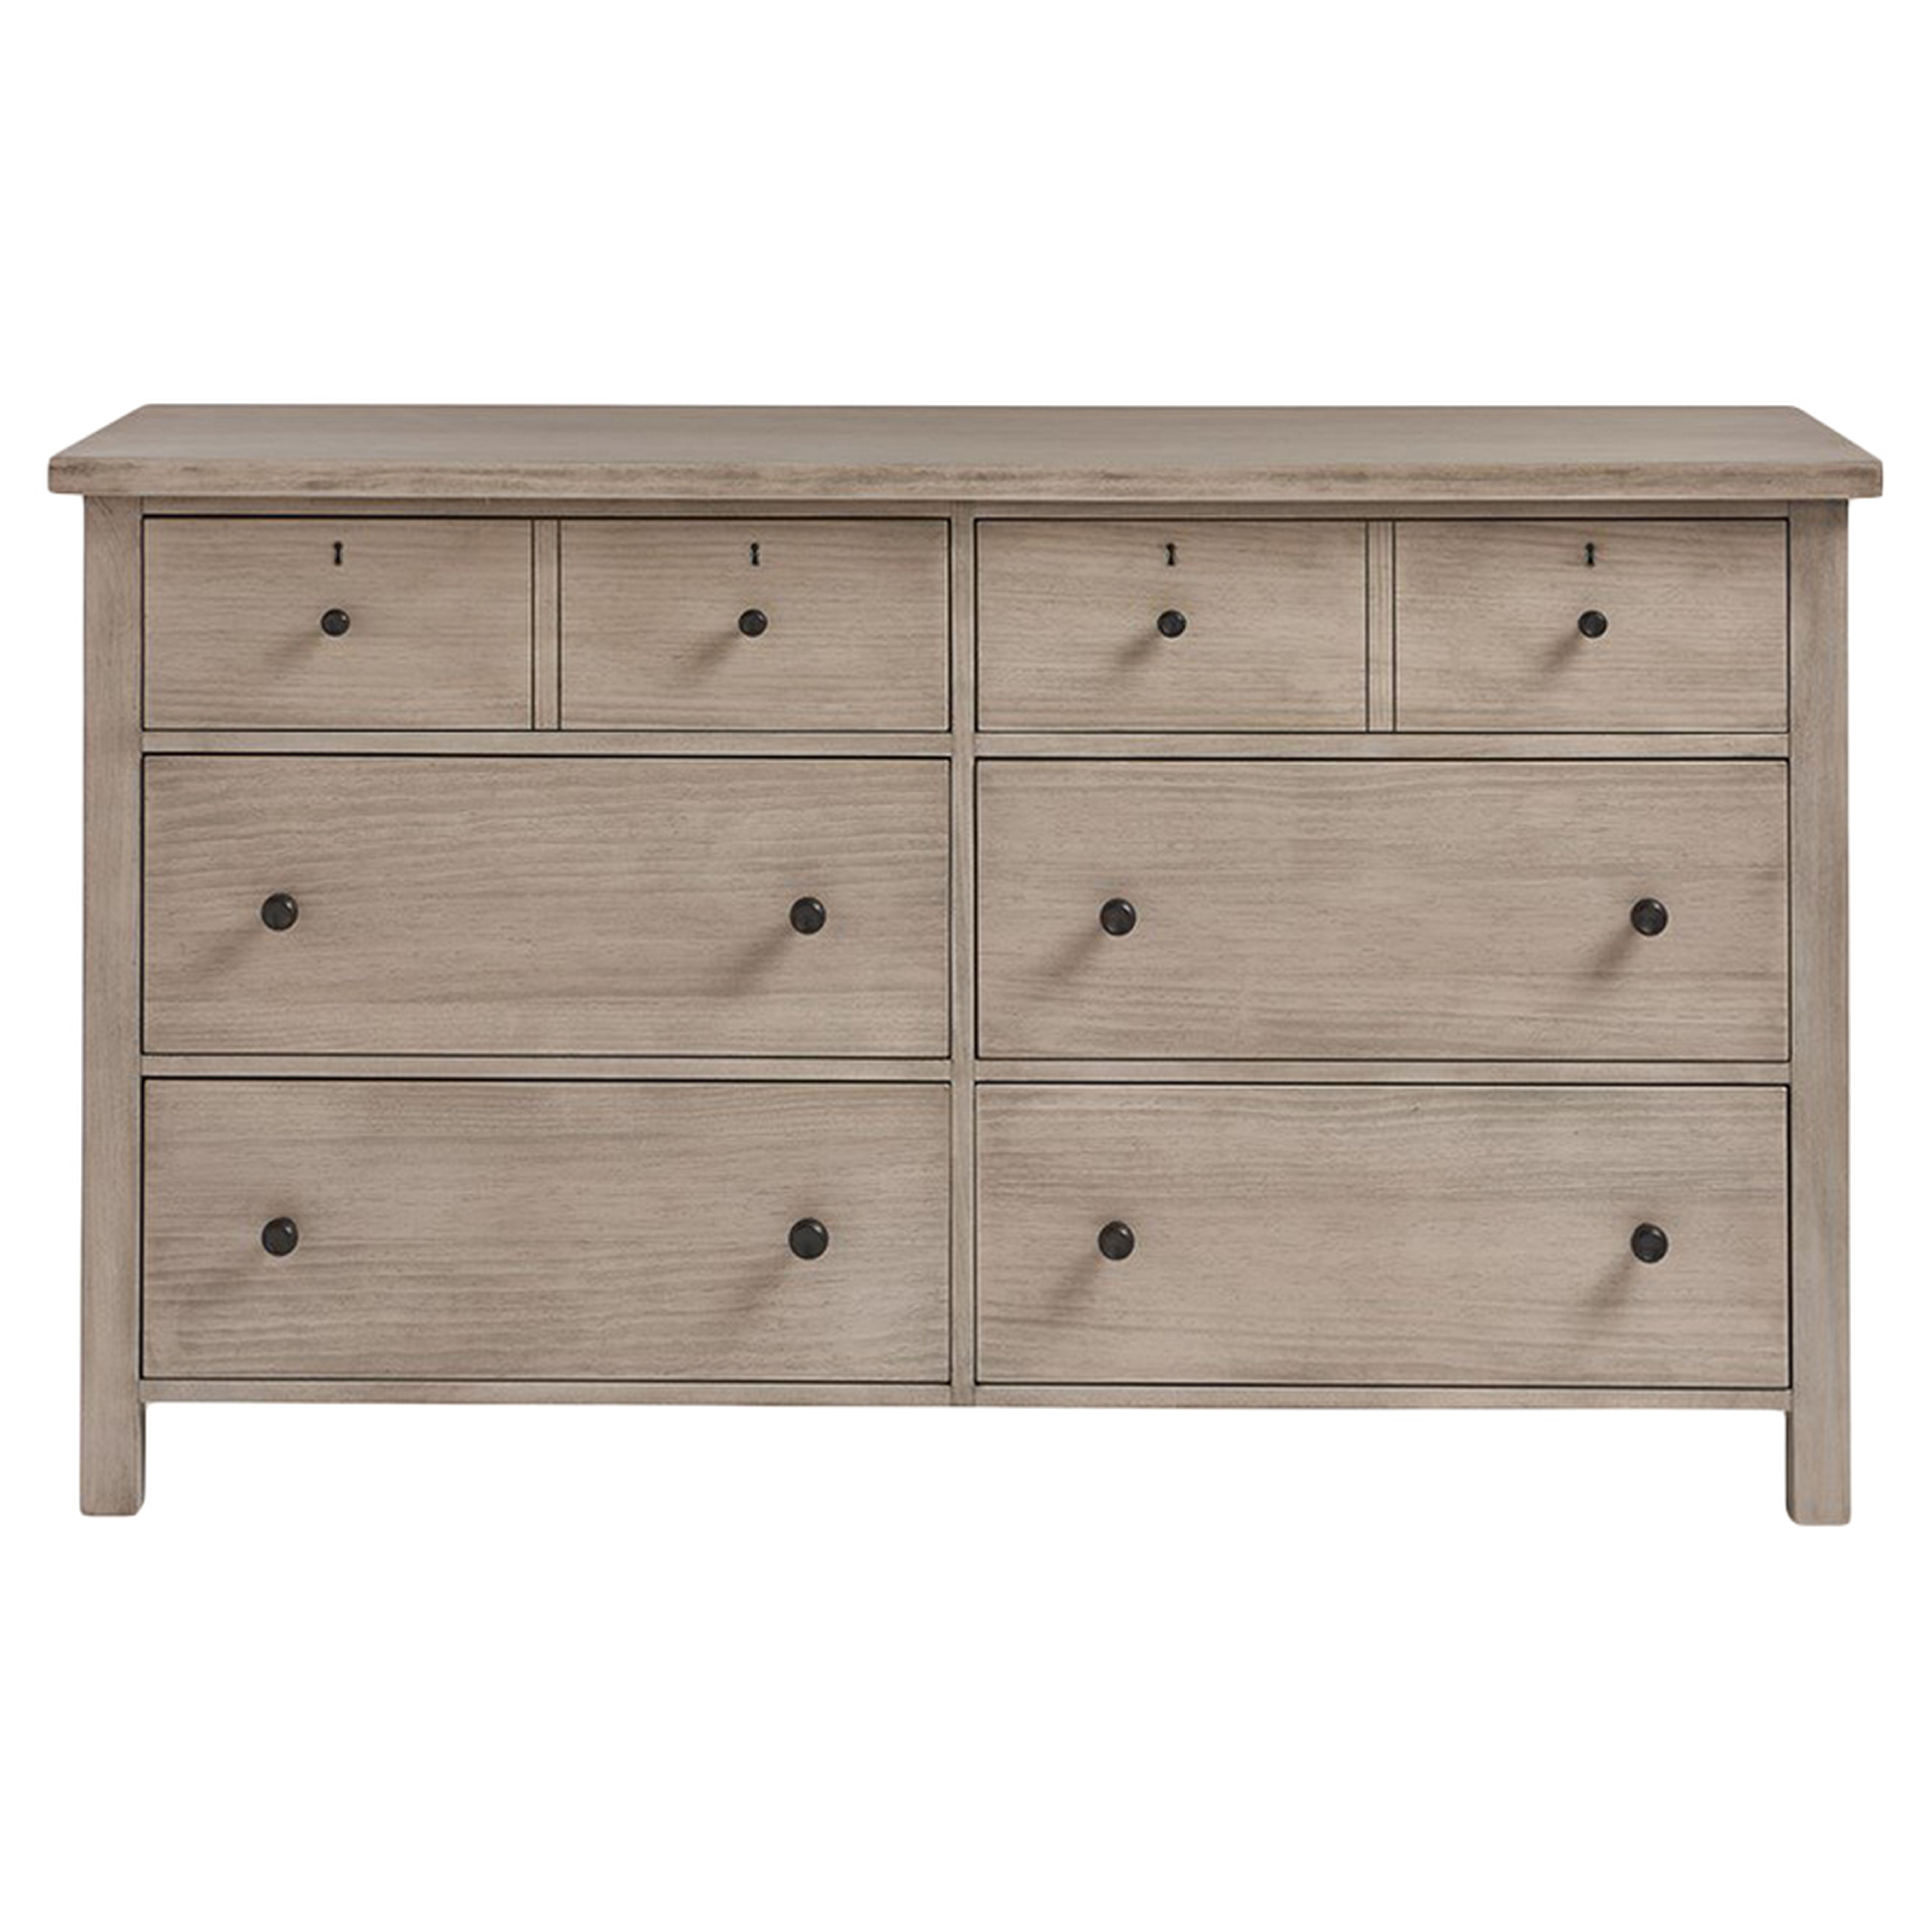 Luther Modern Classic Brown 6 Drawers Dresser - Kathy Kuo Home